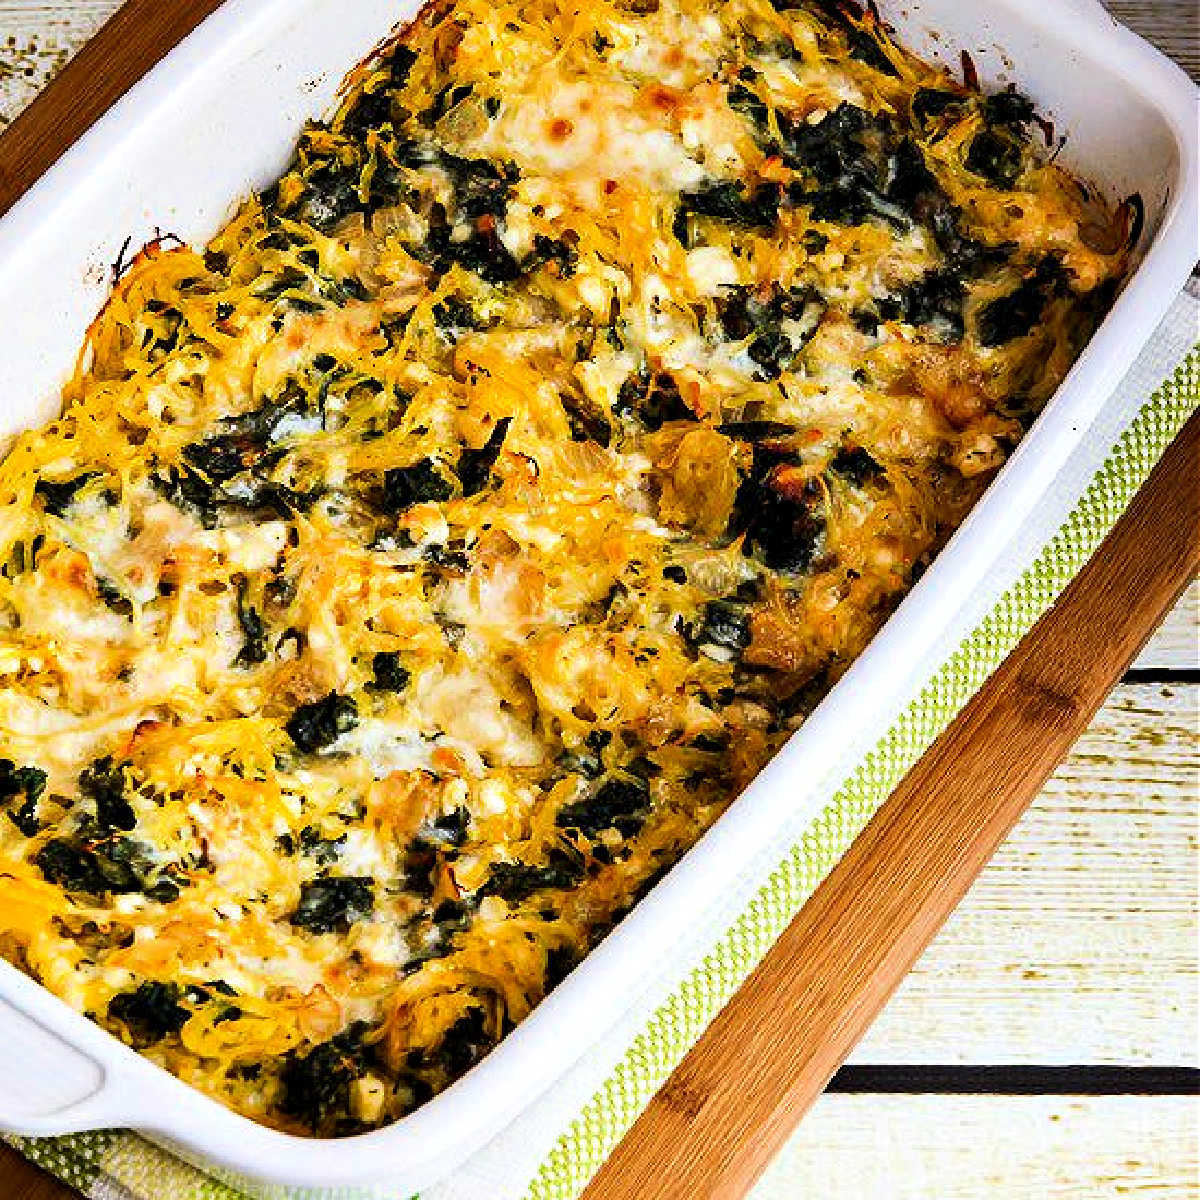 Square image for Twice-Baked Spaghetti Squash with Kale shown in baking dish.